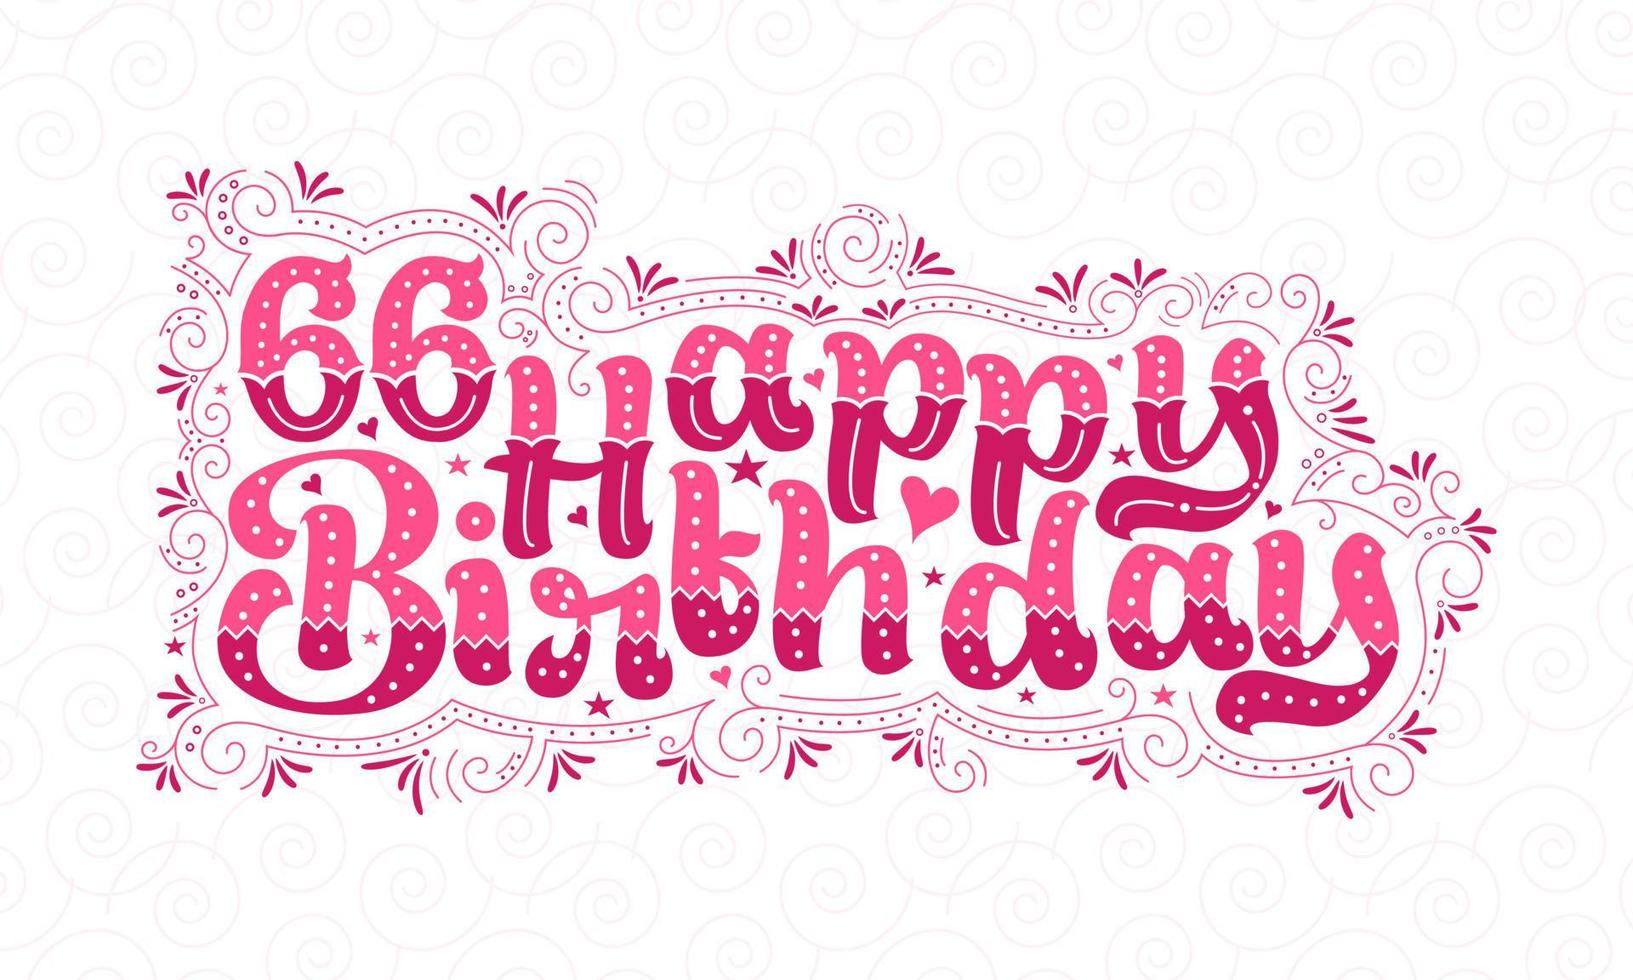 66th Happy Birthday lettering, 66 years Birthday beautiful typography design with pink dots, lines, and leaves. vector